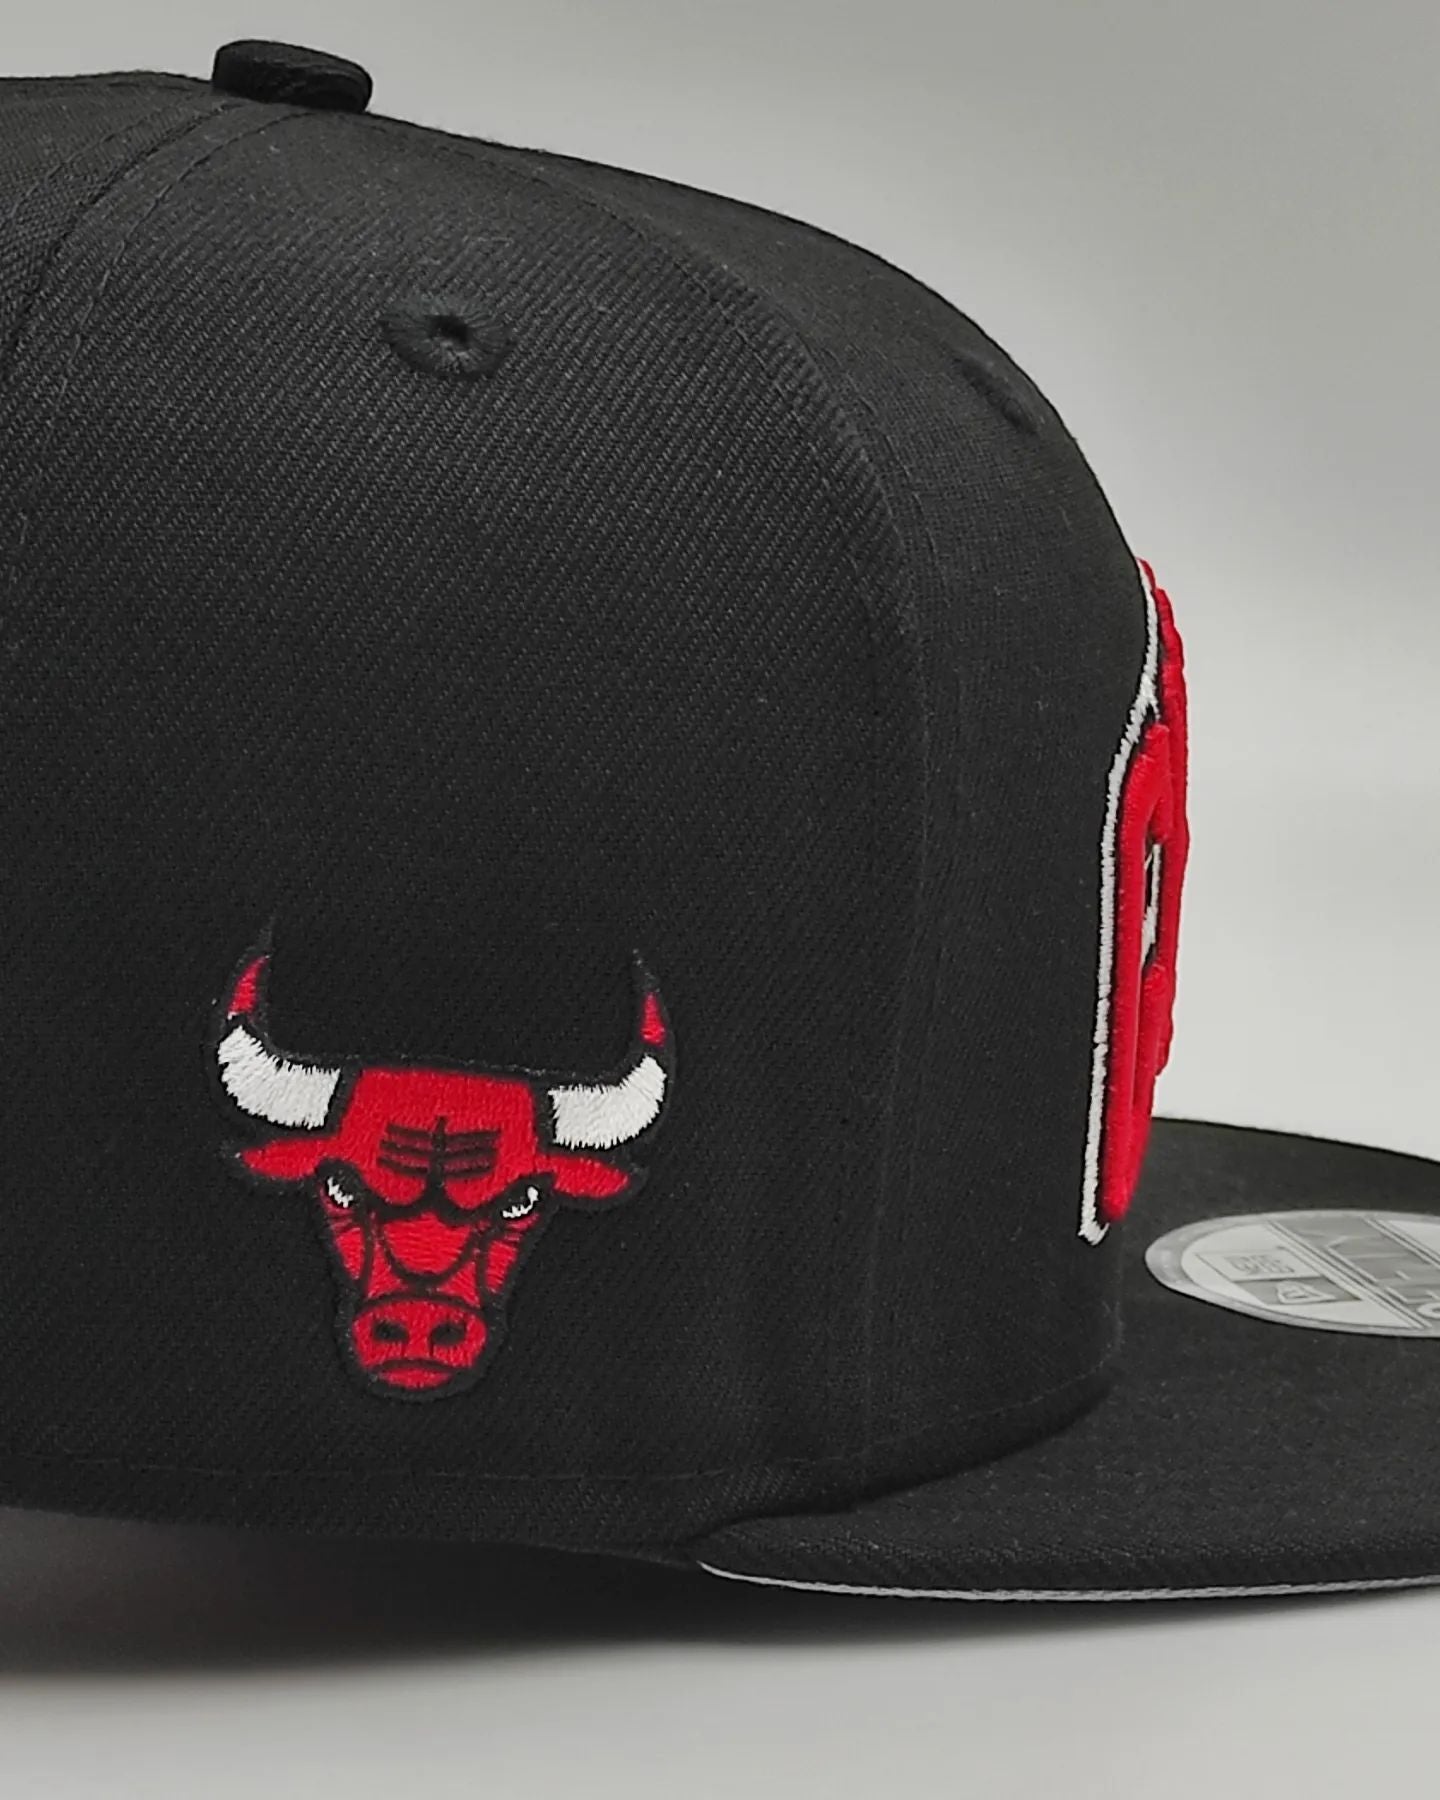 New Era Chicago bulls 9fifty Snapback coleccion jersey